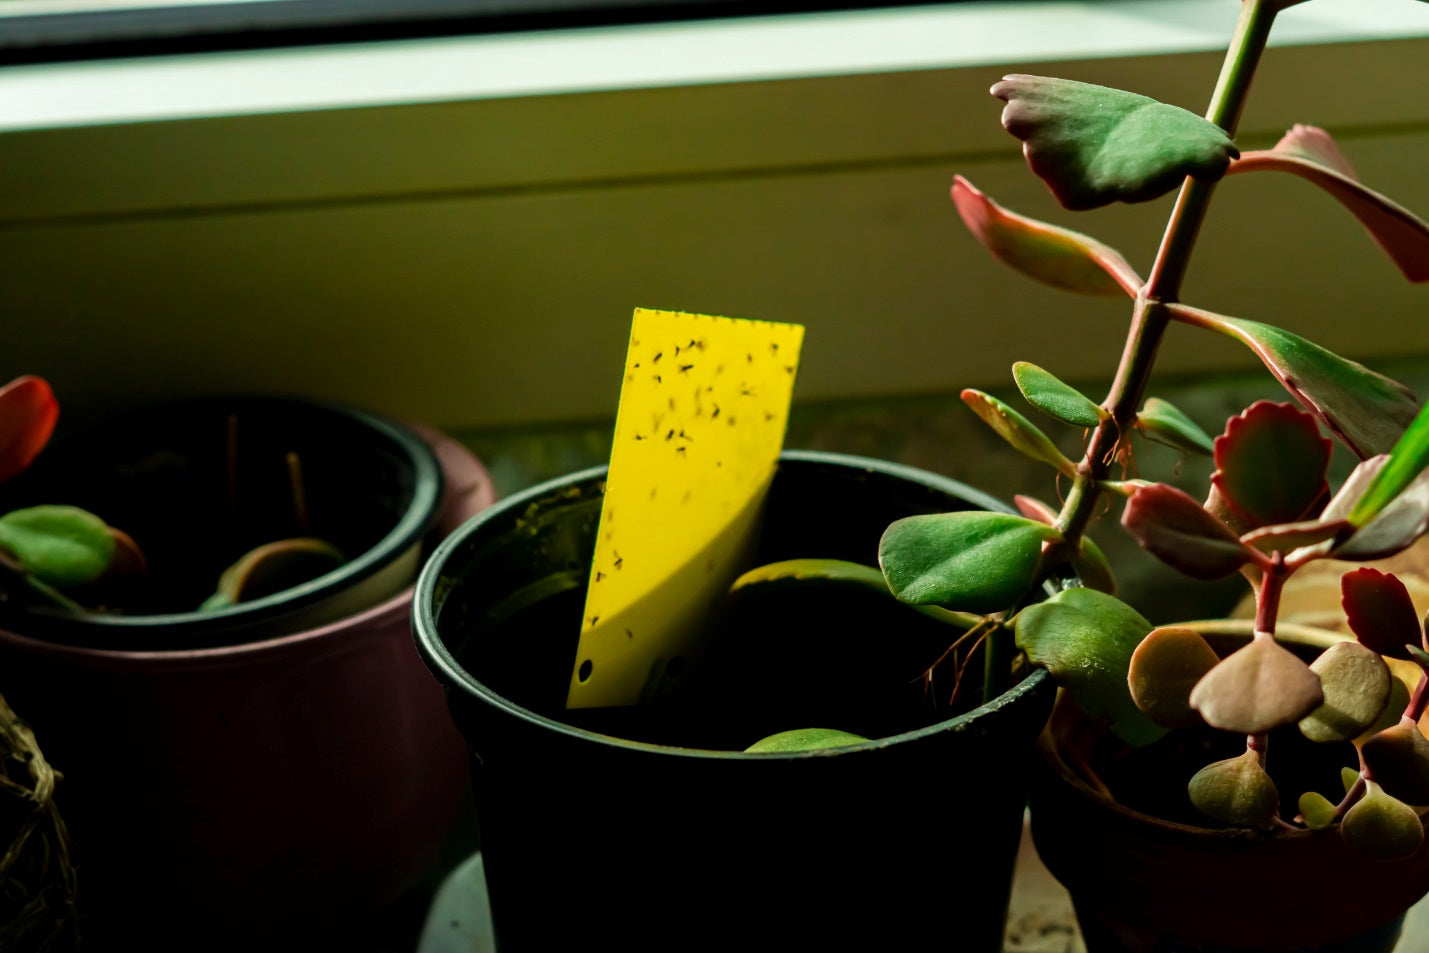 Getting Rid of Fungus Gnats in Houseplants - MosquitoNix®